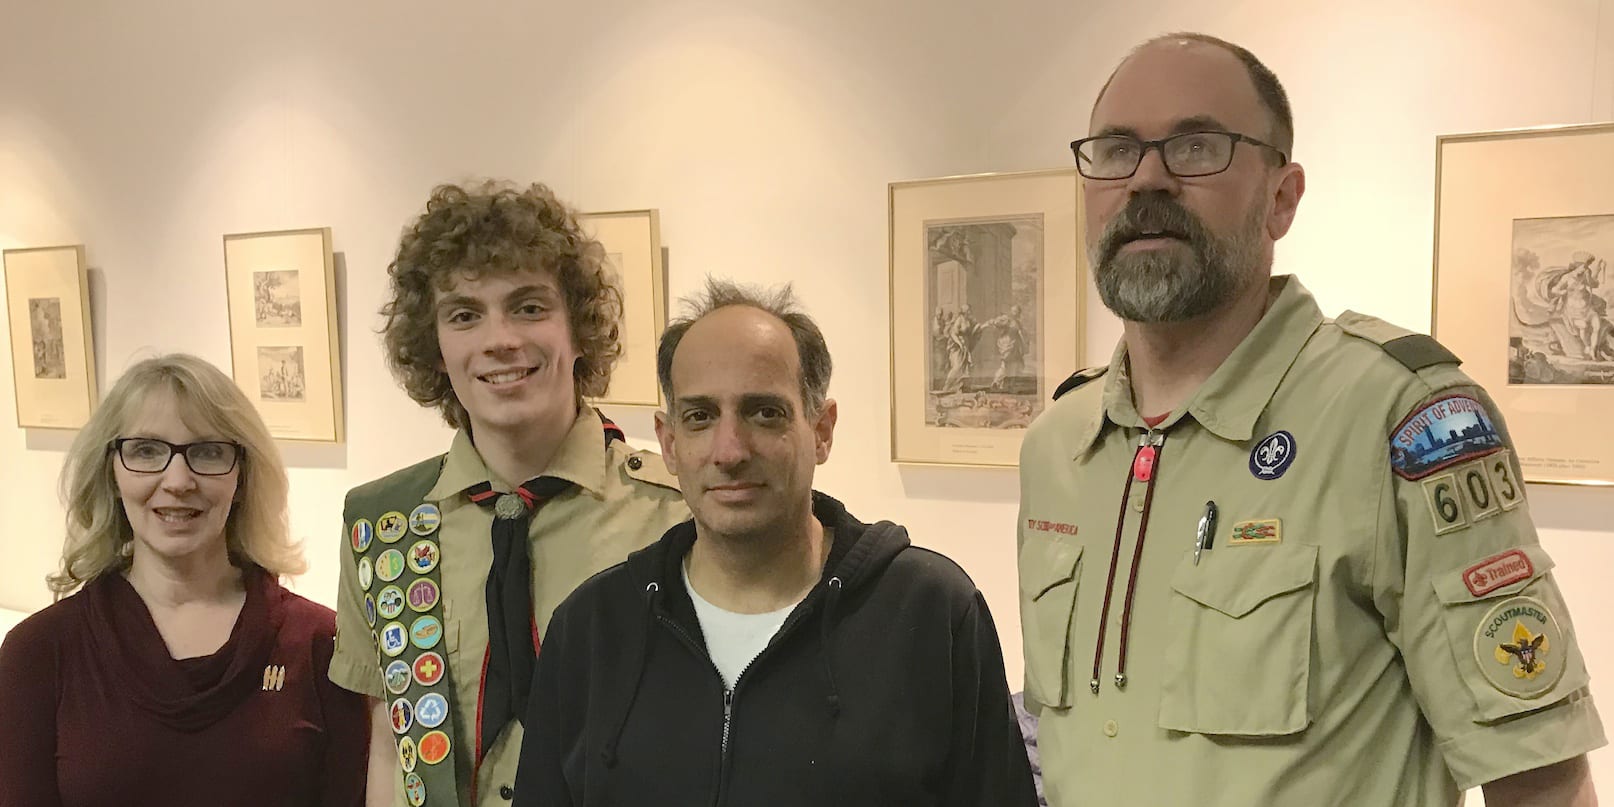 Malden's Harrison Zeiberg was recently honored for achieving the rank of Eagle Scout at a ceremony in his honor. Shown above, from left, his mother Sharyn Rose Zeiberg, Harrison Zeiberg, dad Andrew Zeiberg and Scoutmaster Matthew Burne.